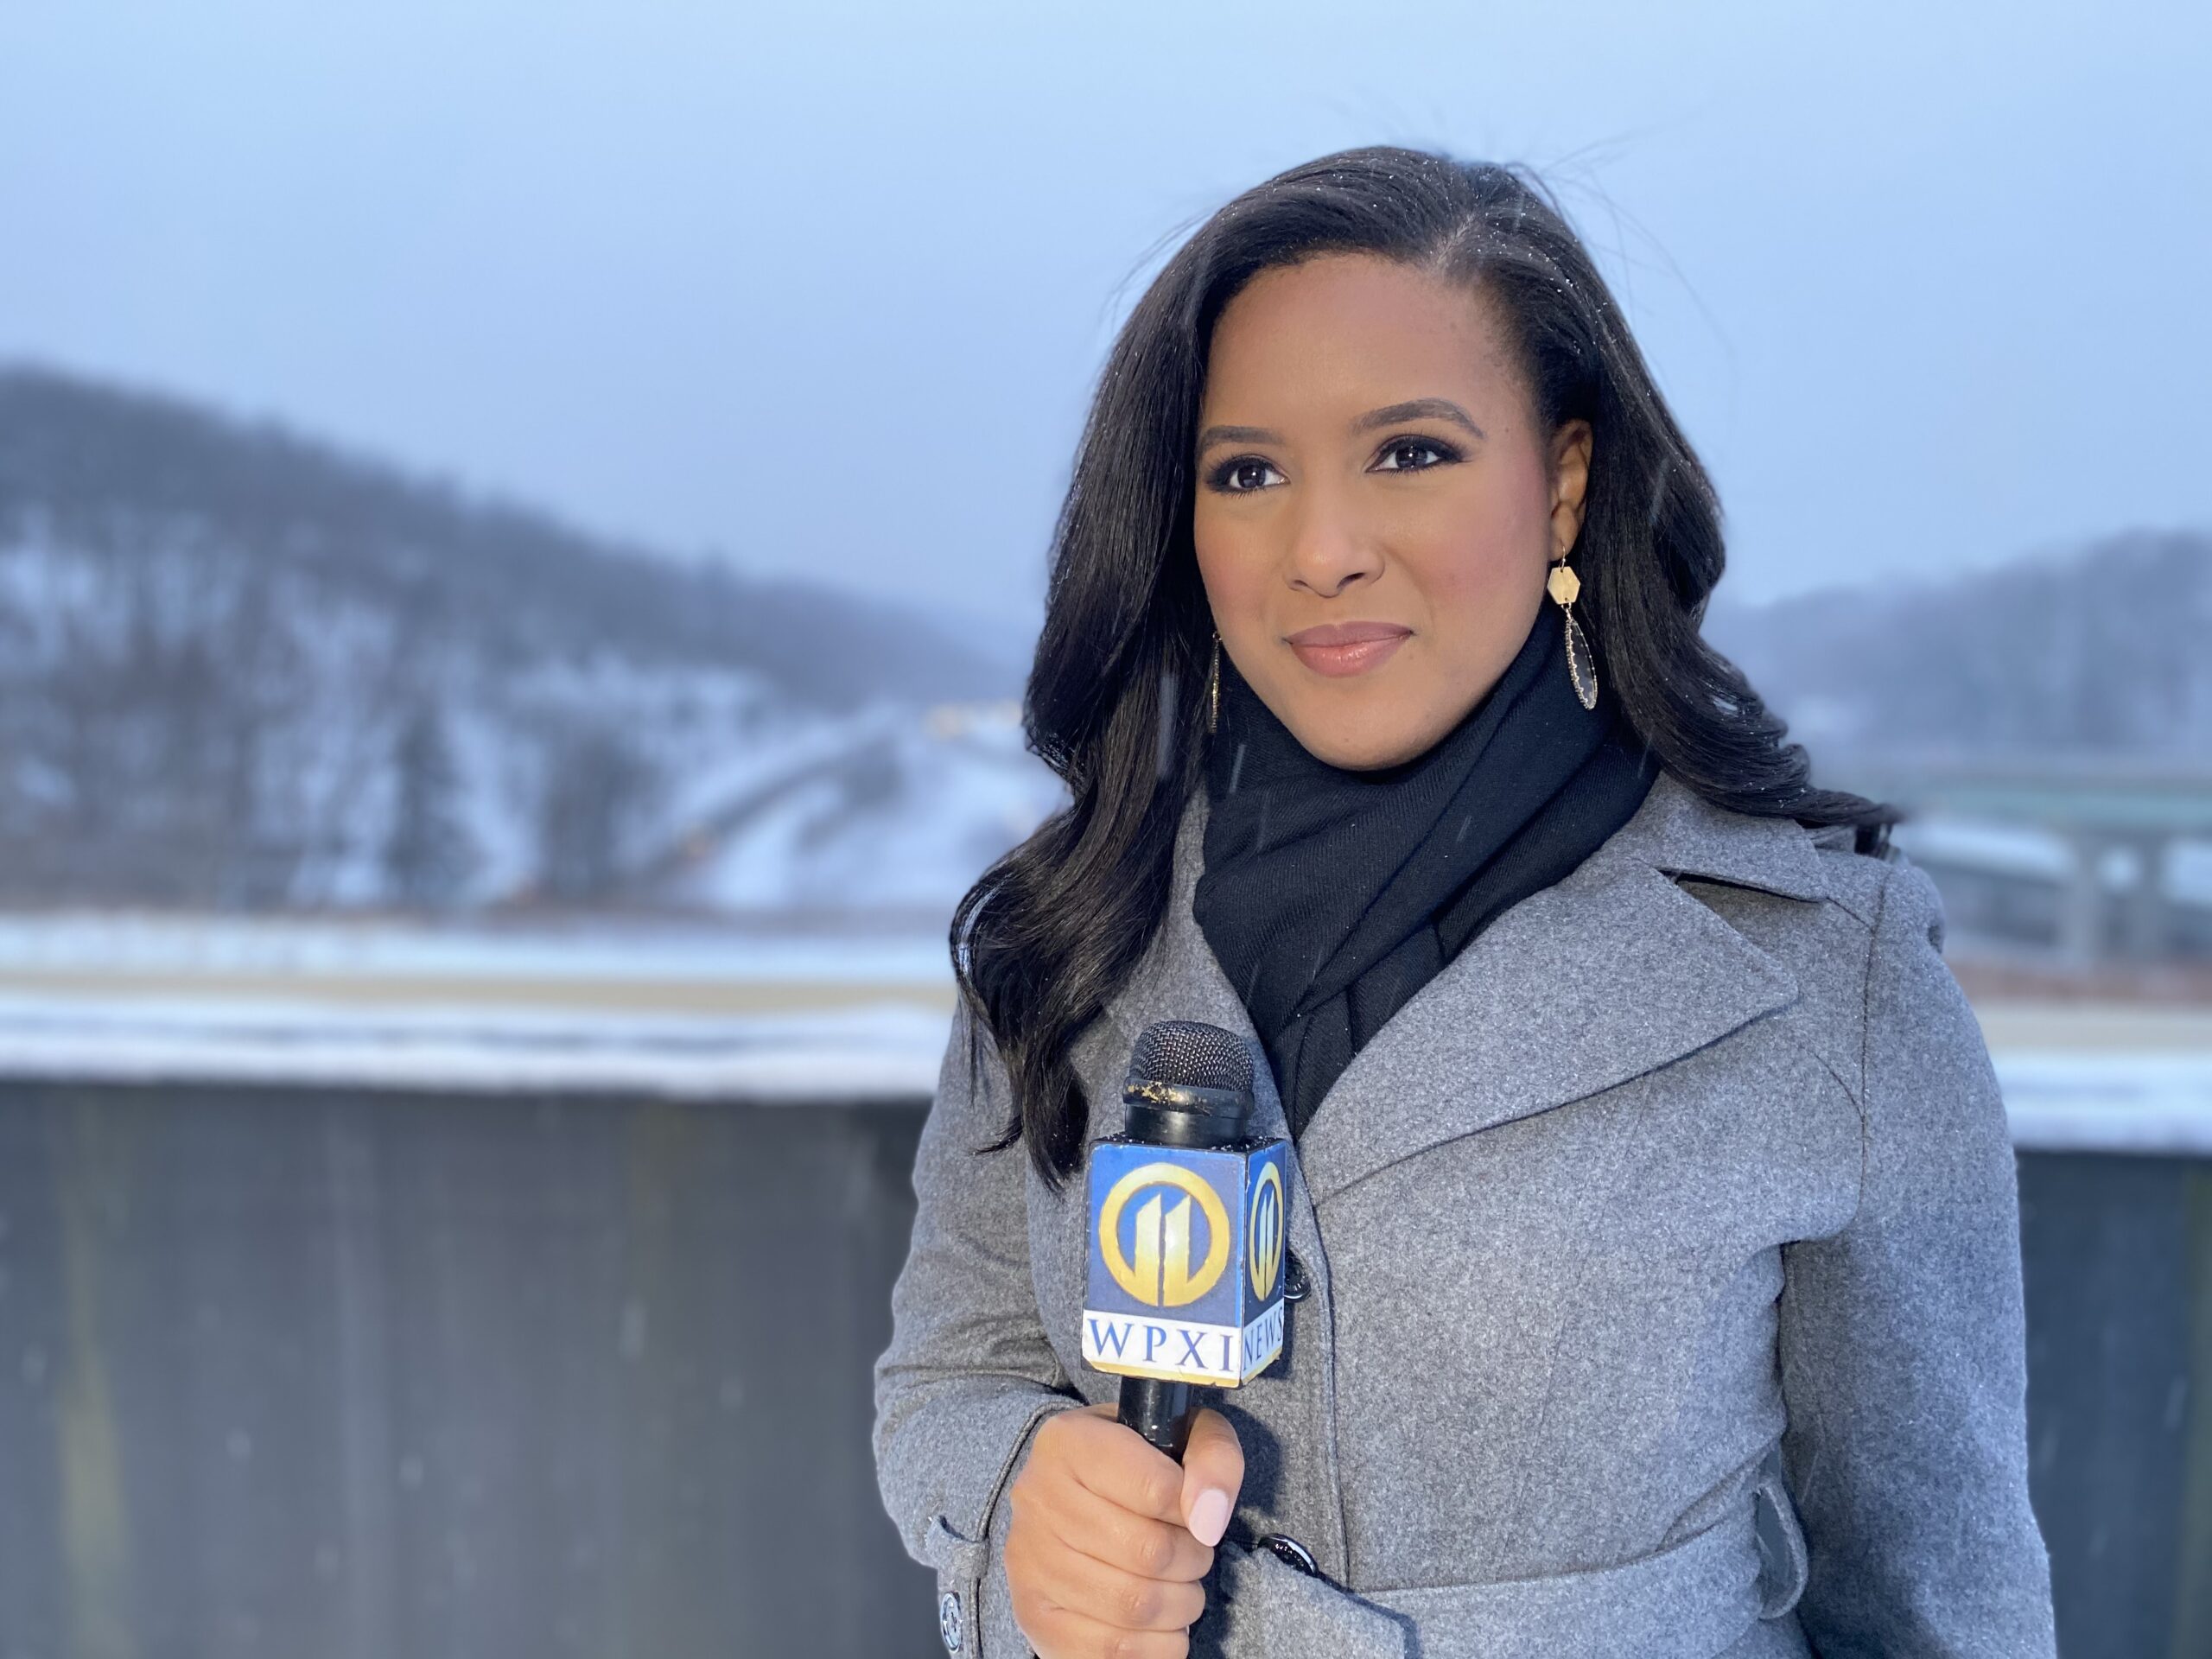 Jessica Faith, Pittsburgh's first Black woman TV meteorologist, leaving WPXI-TV  for job in Washington, D.C. - Pittsburgh Union Progress